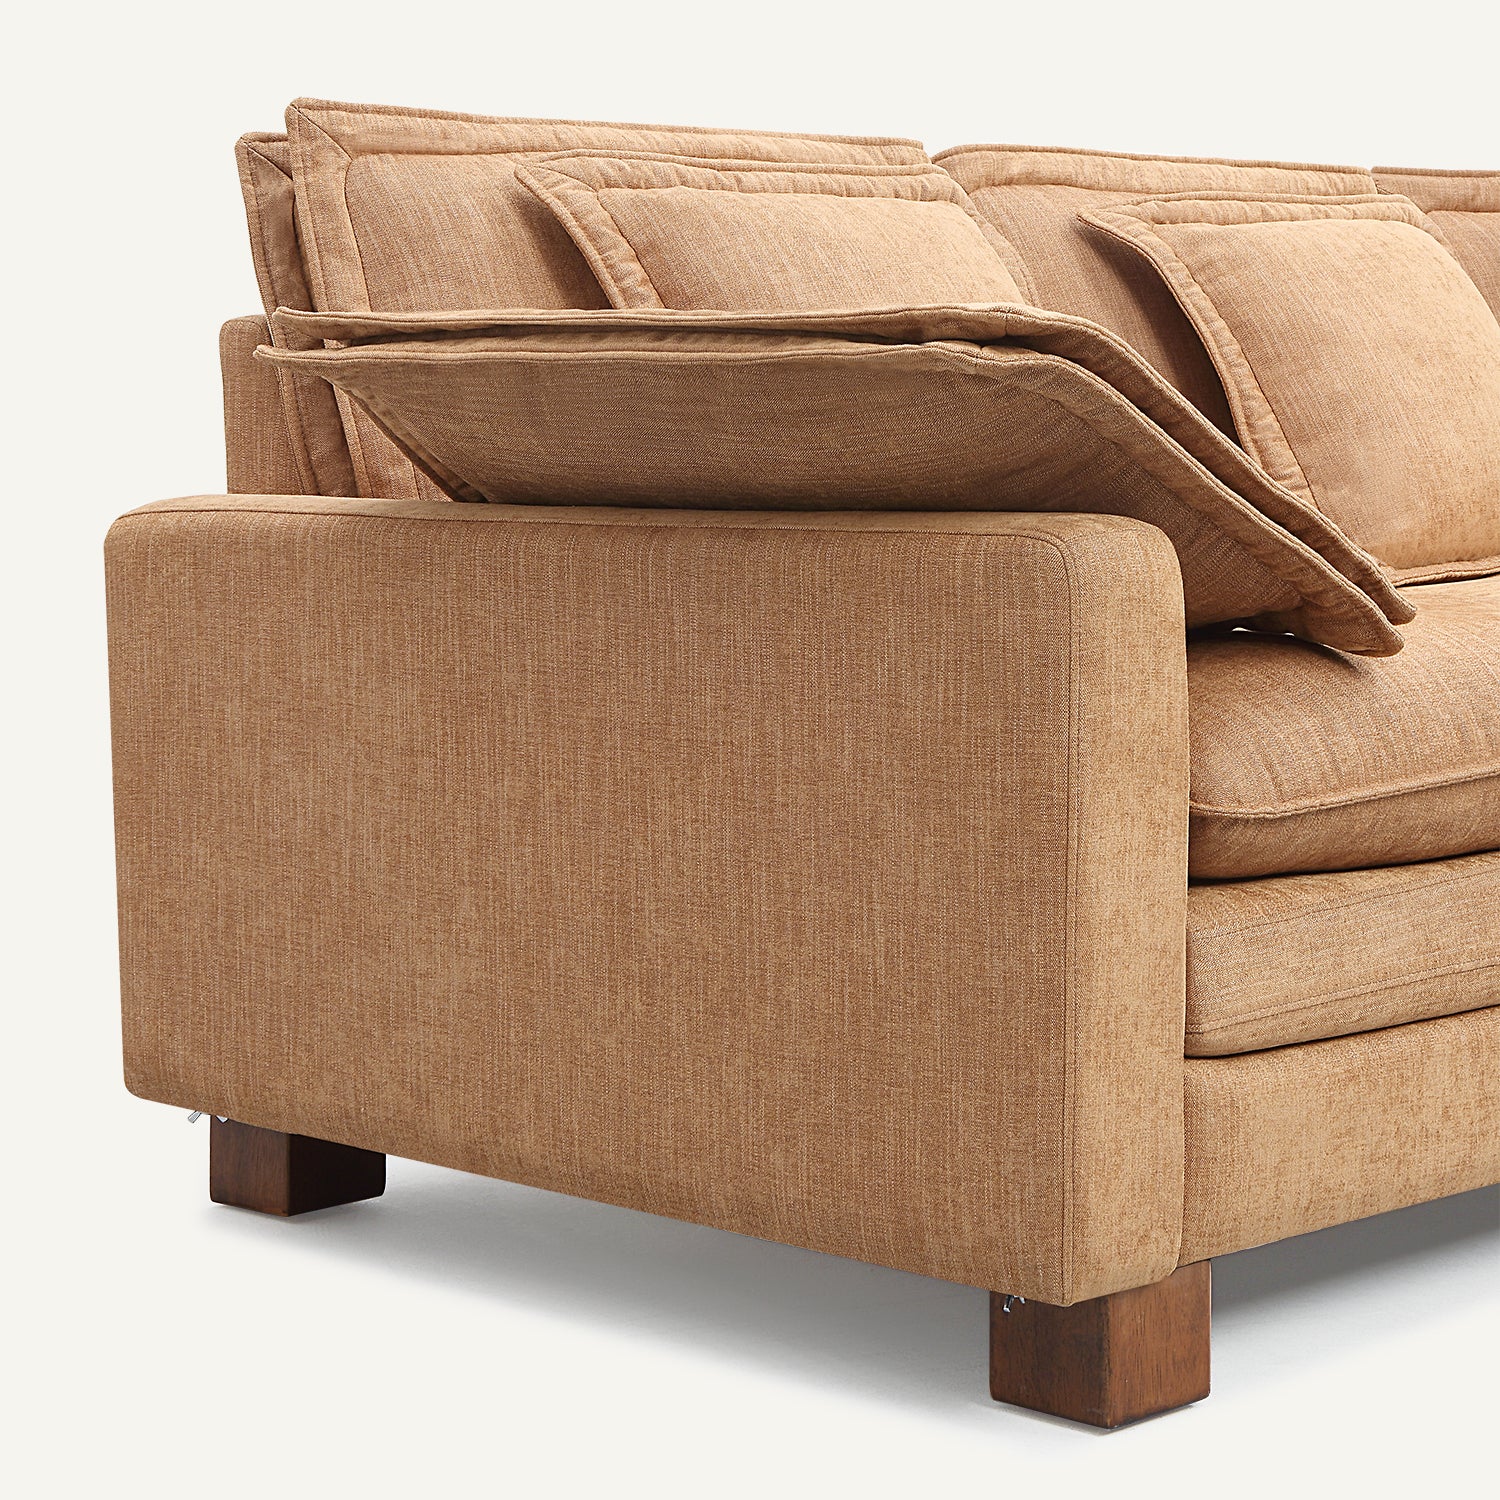 Stacked Tan Linen 8-Seat U Sectional